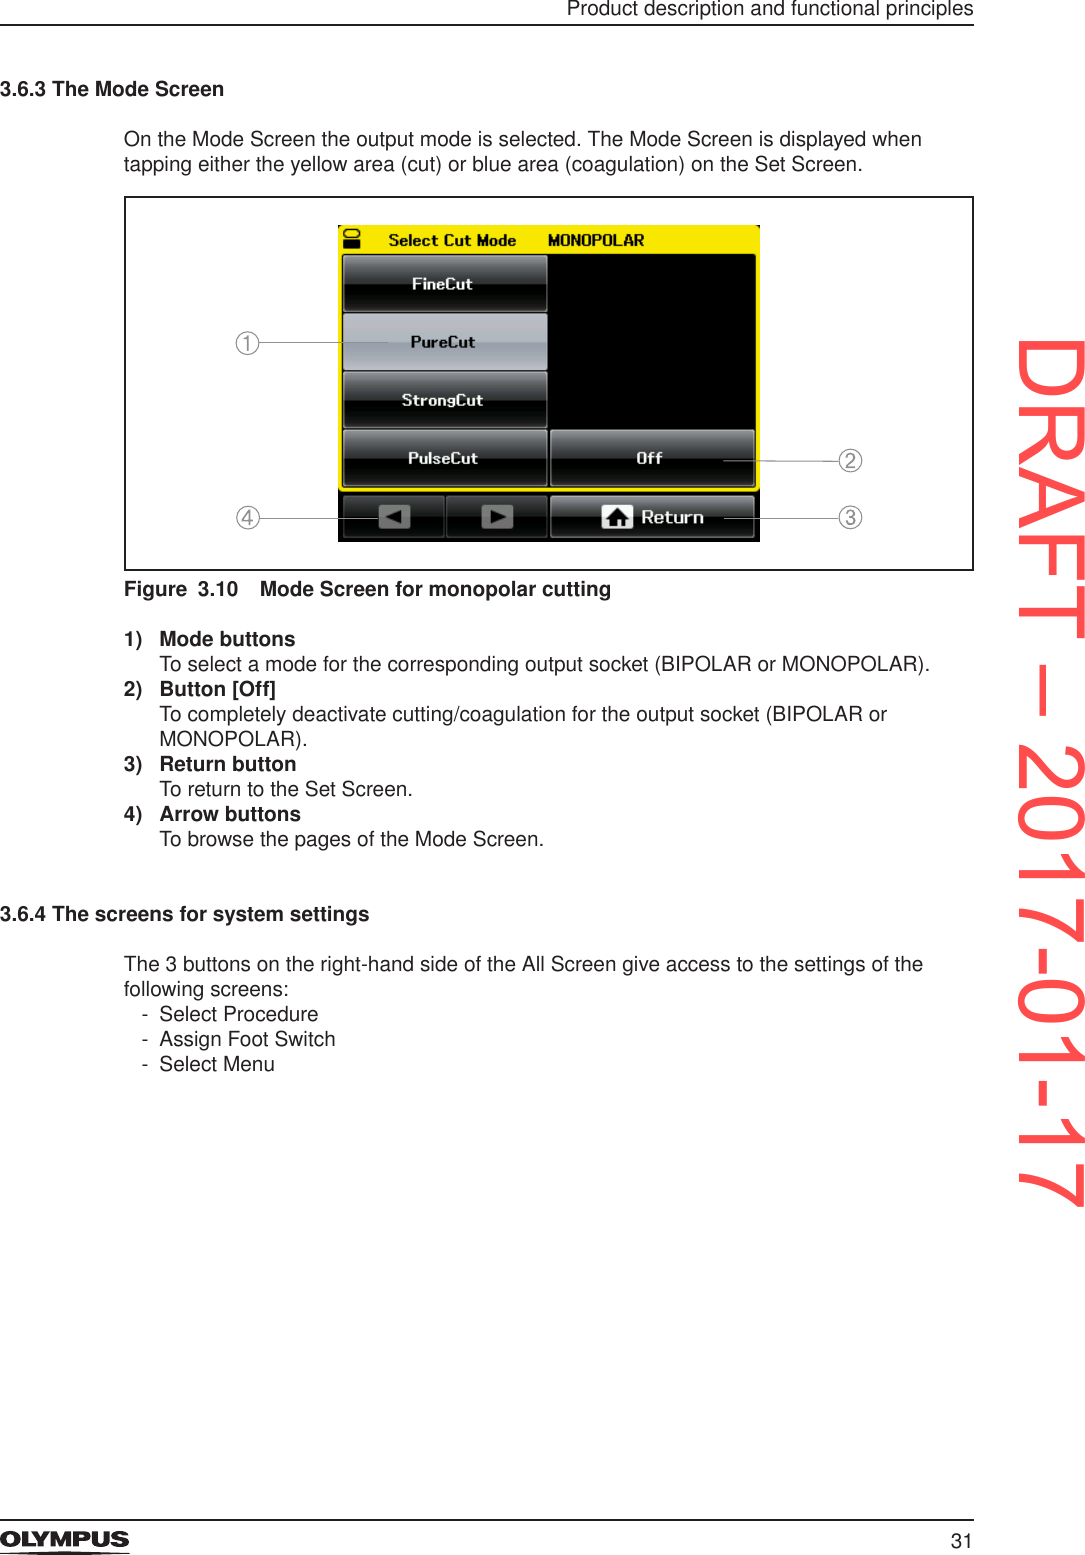 31Product description and functional principles3.6.3 The Mode ScreenOn the Mode Screen the output mode is selected. The Mode Screen is displayed when tapping either the yellow area (cut) or blue area (coagulation) on the Set Screen.Figure 3.10  Mode Screen for monopolar cutting1)  Mode buttonsTo select a mode for the corresponding output socket (BIPOLAR or MONOPOLAR).2)  Button [Off]To completely deactivate cutting/coagulation for the output socket (BIPOLAR or MONOPOLAR).3)  Return buttonTo return to the Set Screen.4)  Arrow buttonsTo browse the pages of the Mode Screen.3.6.4 The screens for system settingsThe 3 buttons on the right-hand side of the All Screen give access to the settings of the following screens: - Select Procedure - Assign Foot Switch - Select MenuDRAFT – 2017-01-17